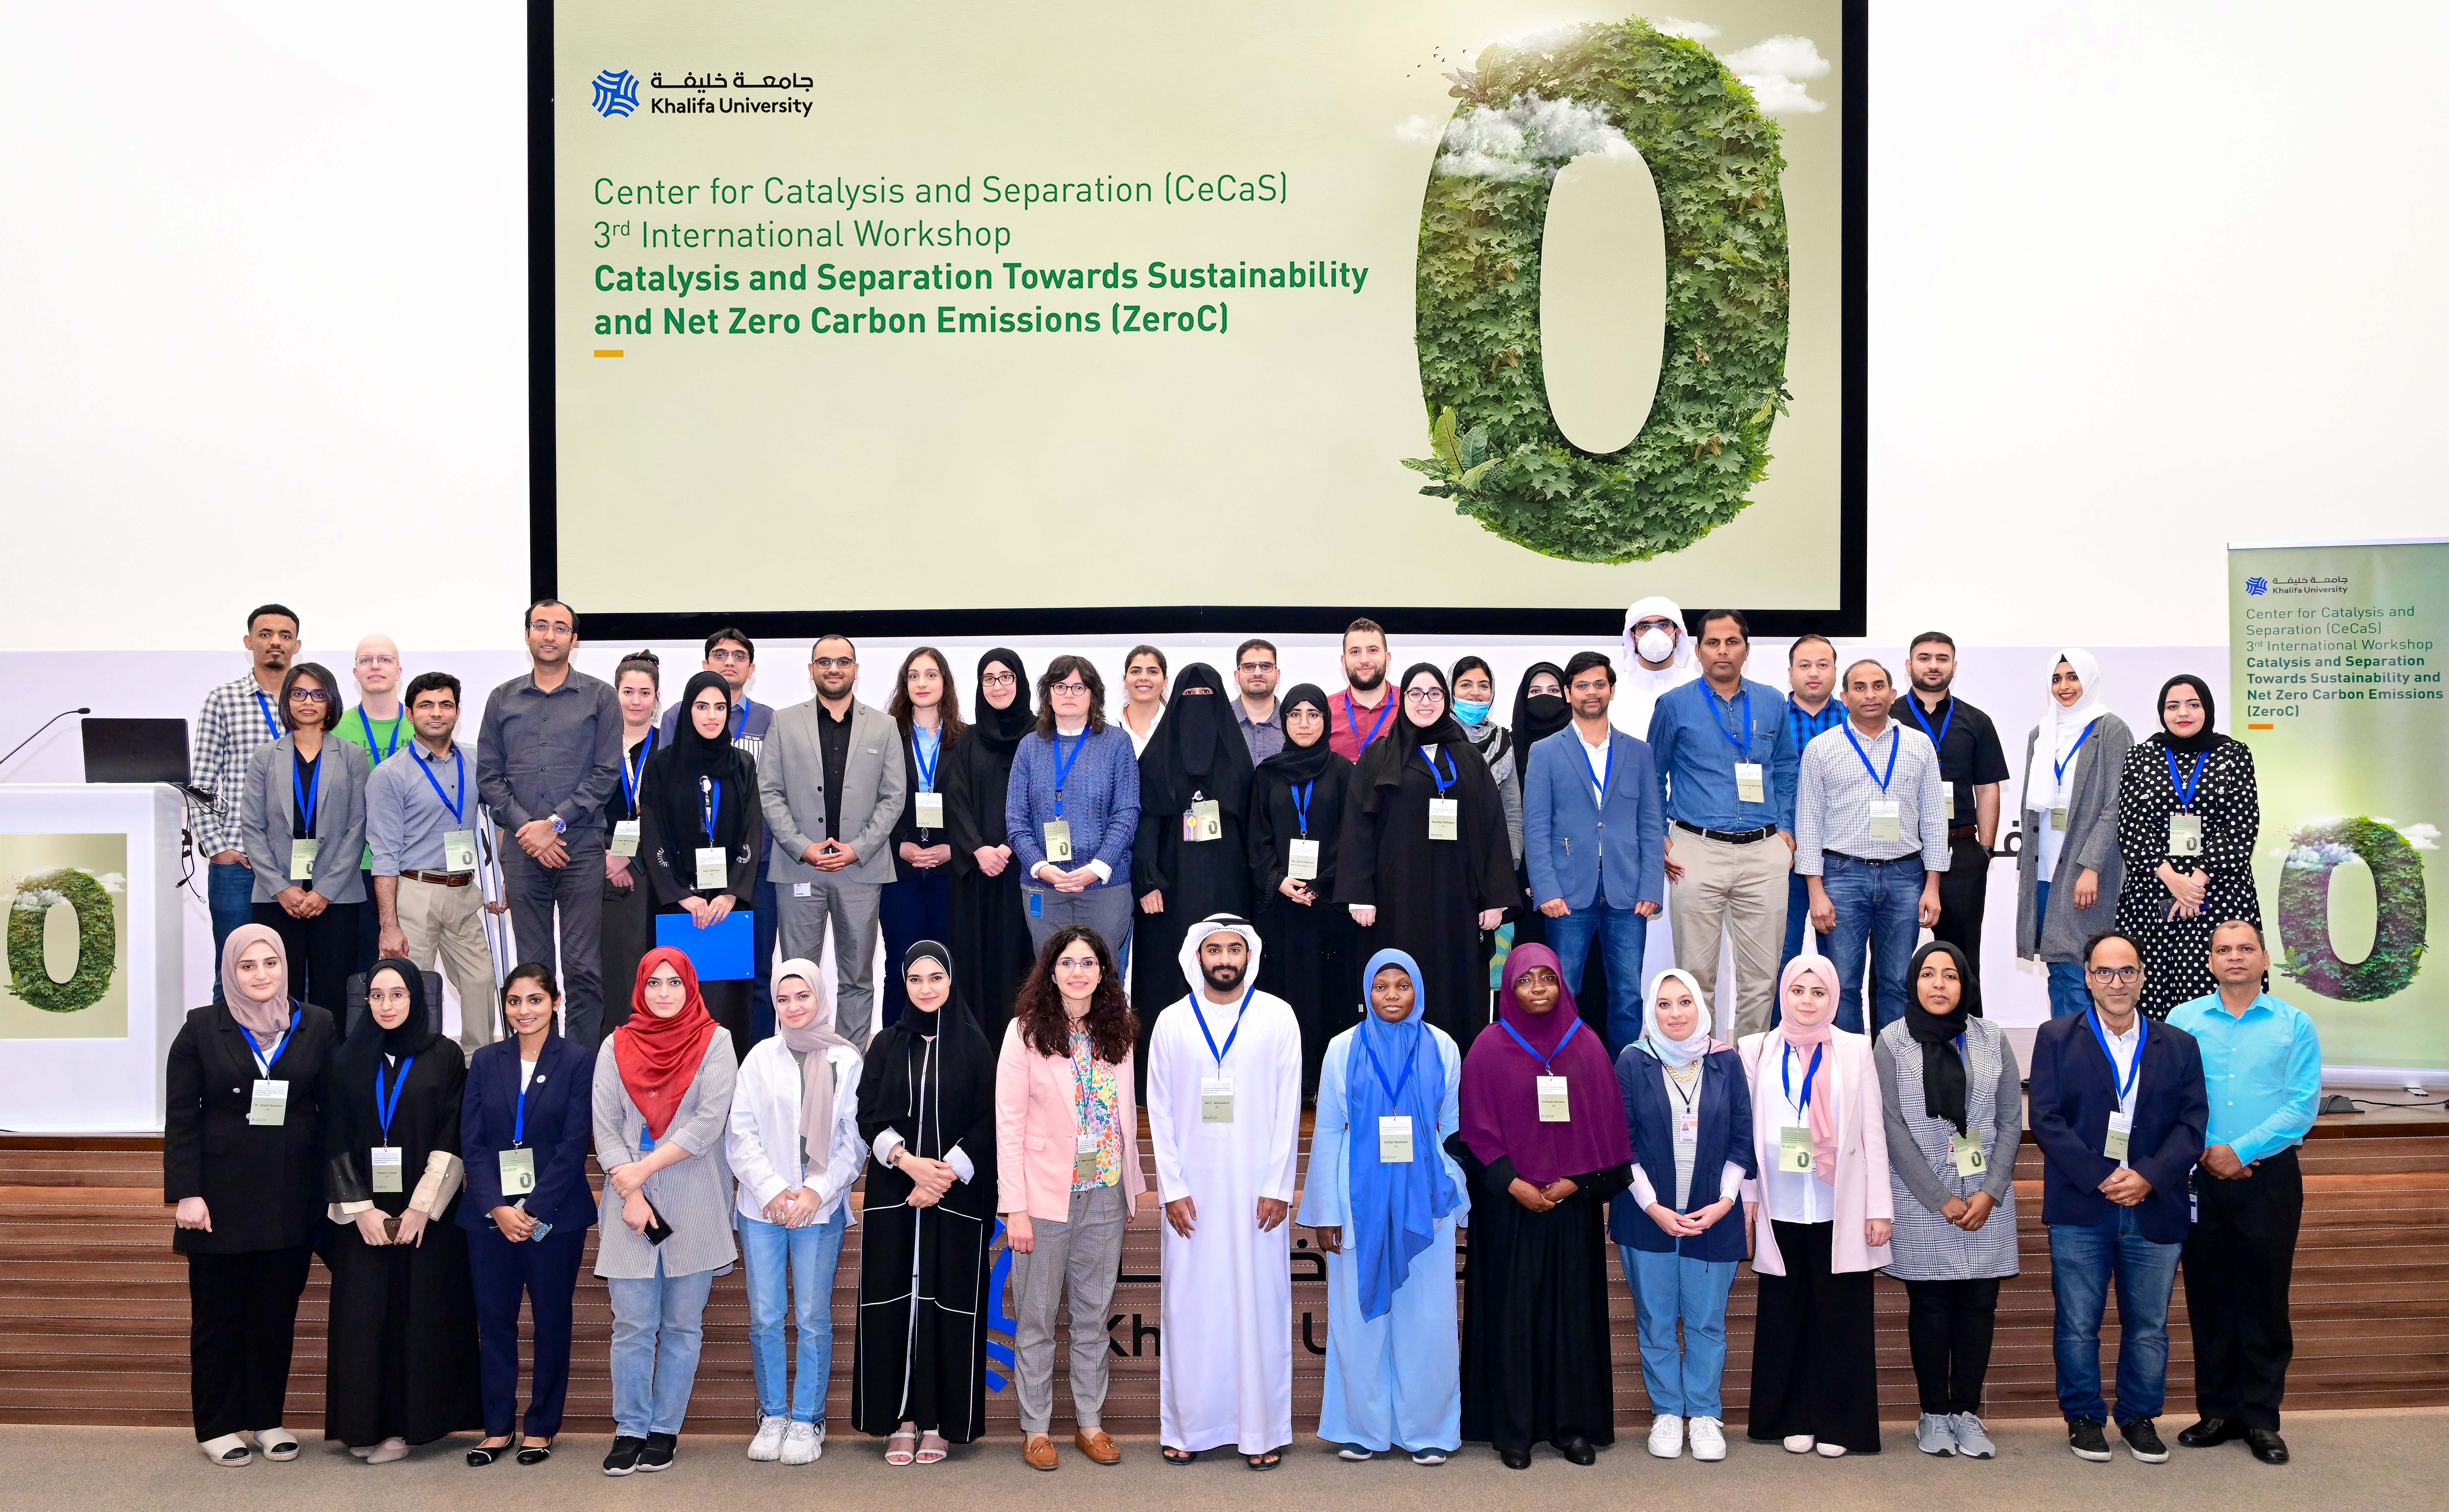 The Center for Catalysis and Separation (CeCaS) recently hosted its 3rd International Workshop on “Catalysis and Separation Towards Sustainability and Net Zero Carbon Emissions (ZeroC)”